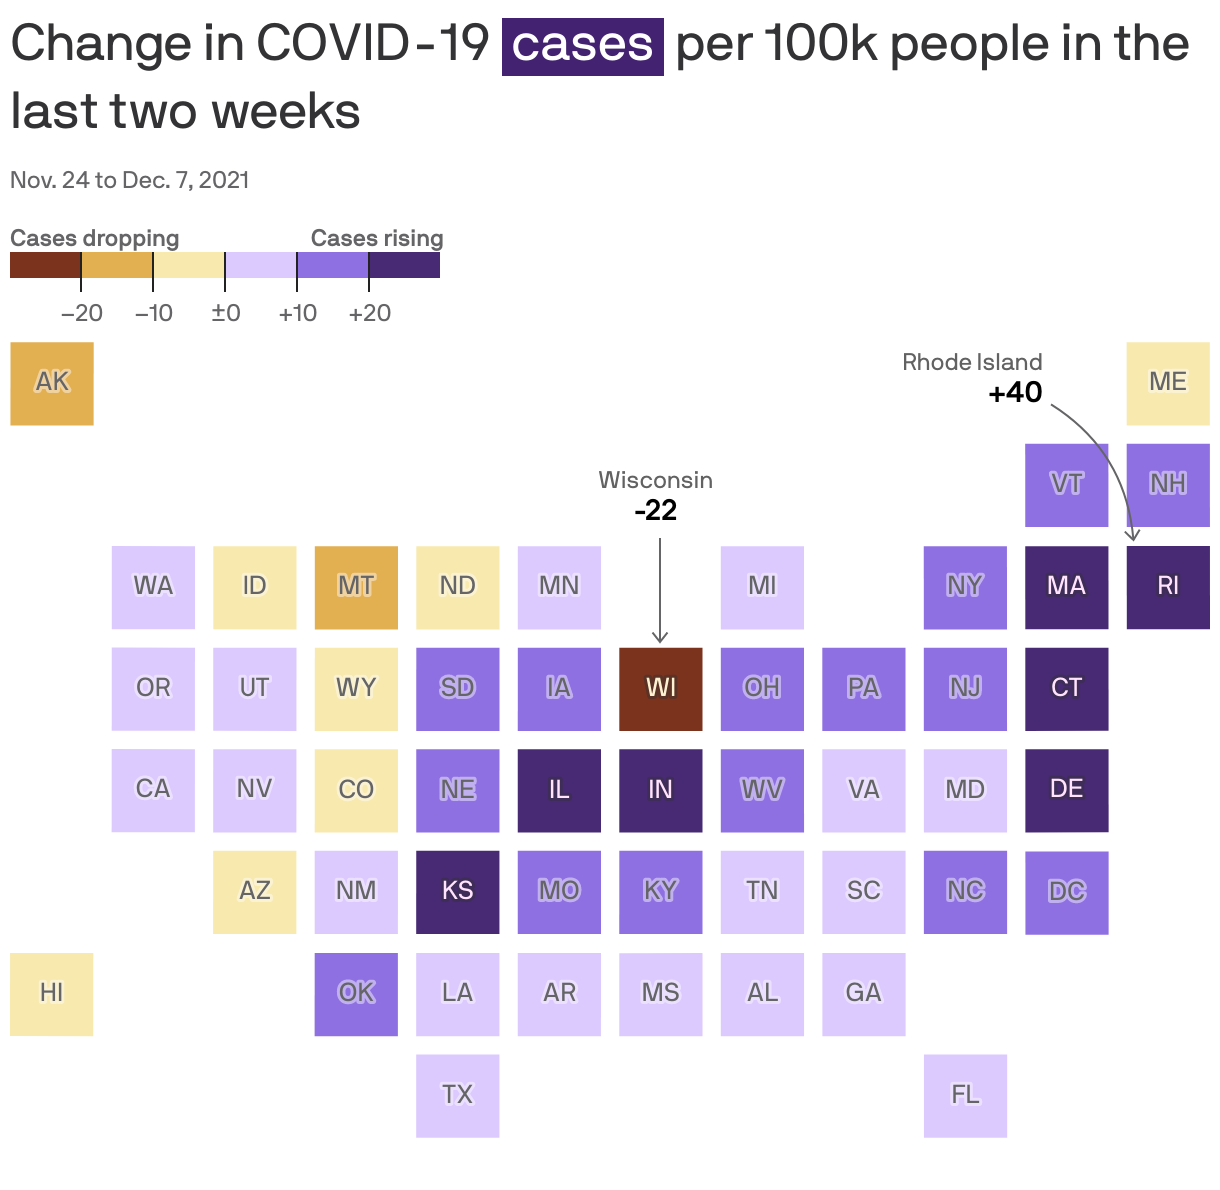 Change in COVID-19 <span style="background:#432371; padding:0px 5px 3px 5px;color:white;">cases</span> per 100k people in the last two weeks